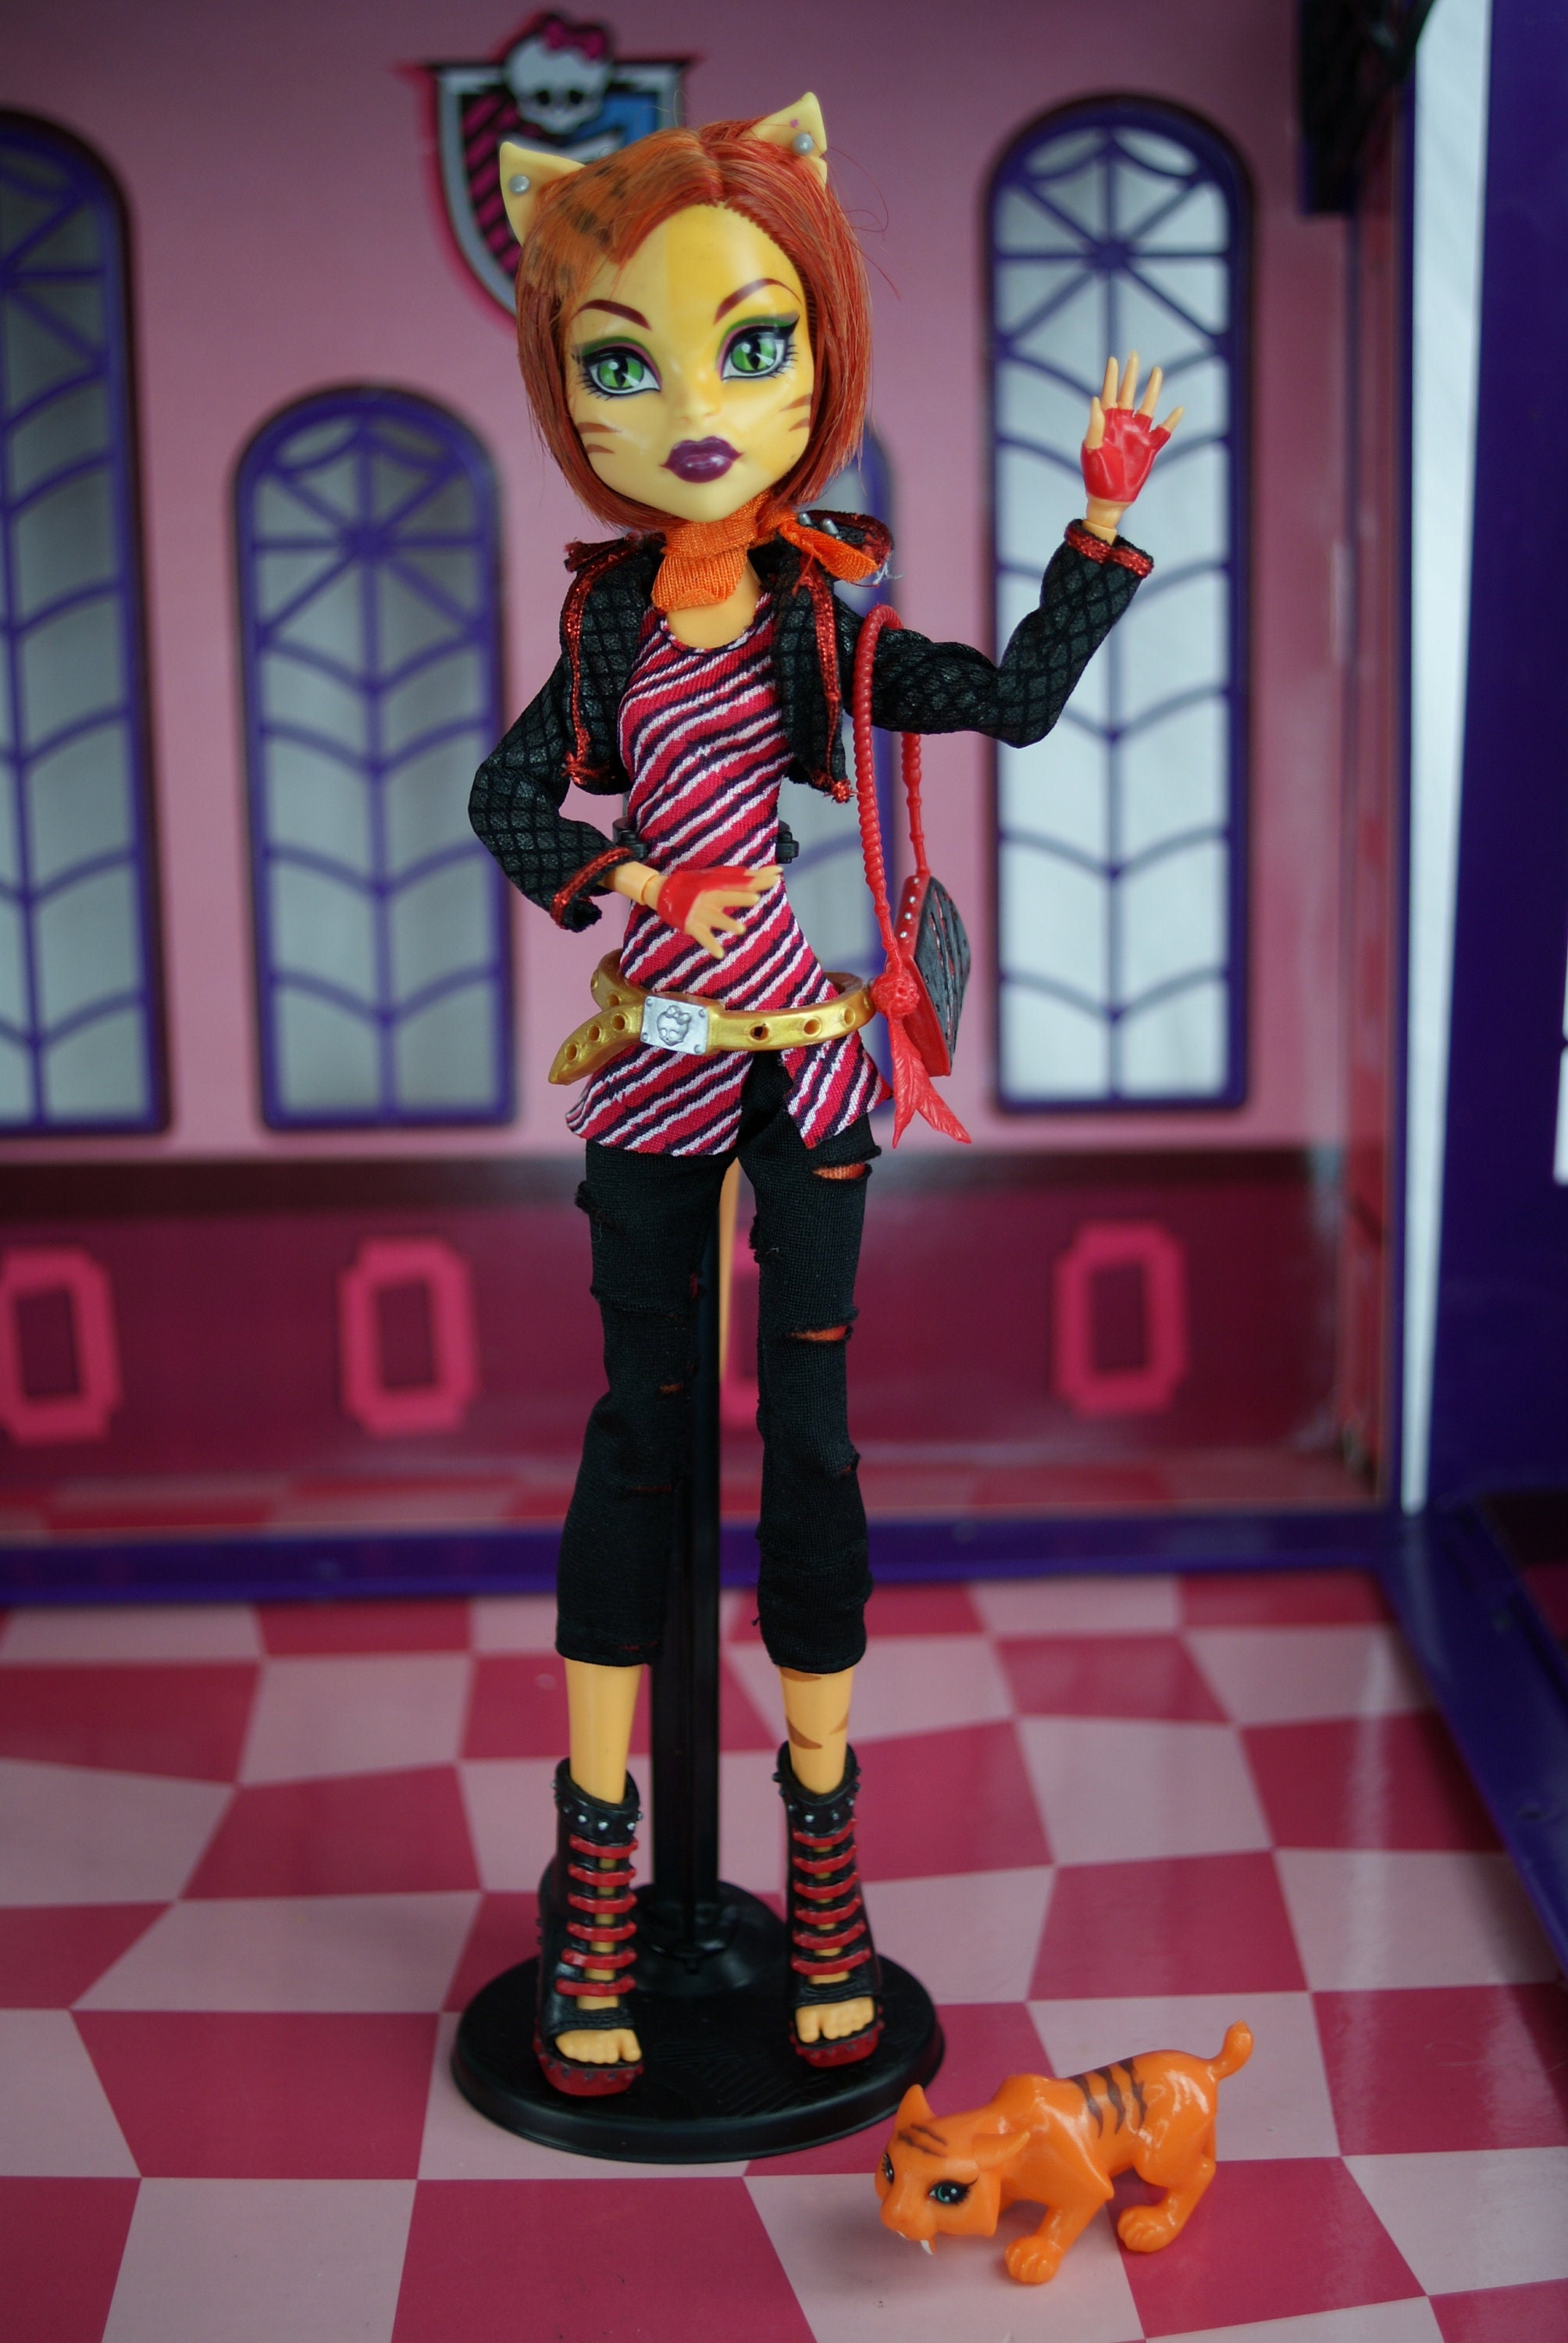 Monster High Toralei Stripe Basic first wave doll and Sweet Fang Mattel  2011 #4